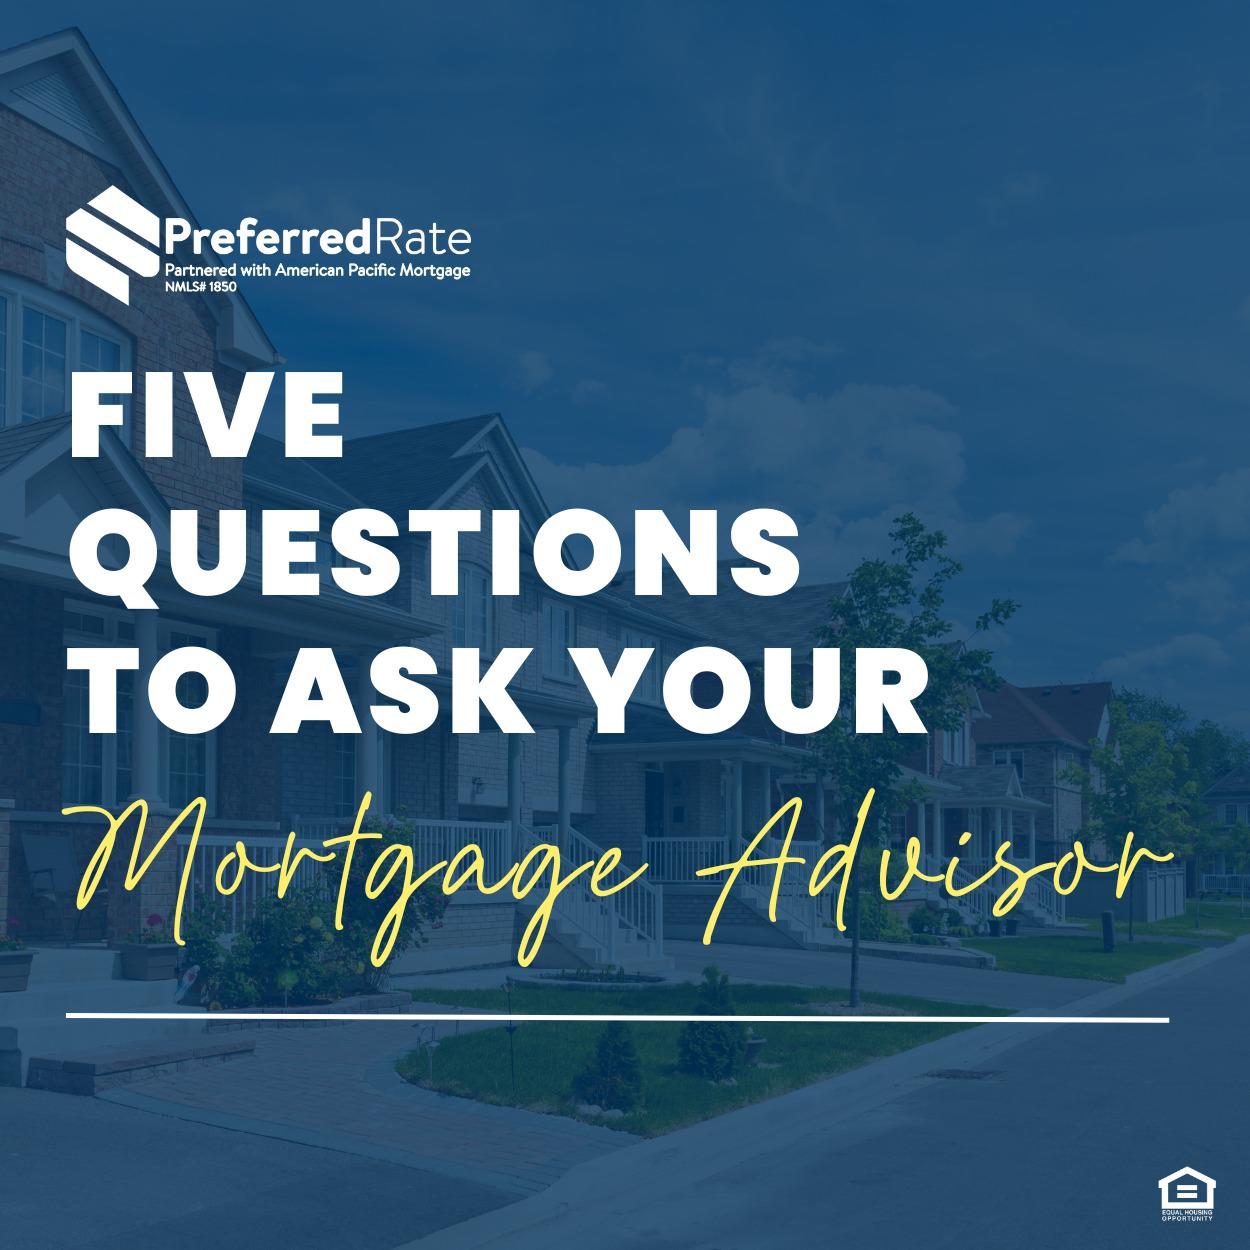 Having a list of mortgage questions to ask your mortgage advisor is just the start. Knowing the answ Loan Officer - 216621 Oakbrook Terrace (630)673-6735